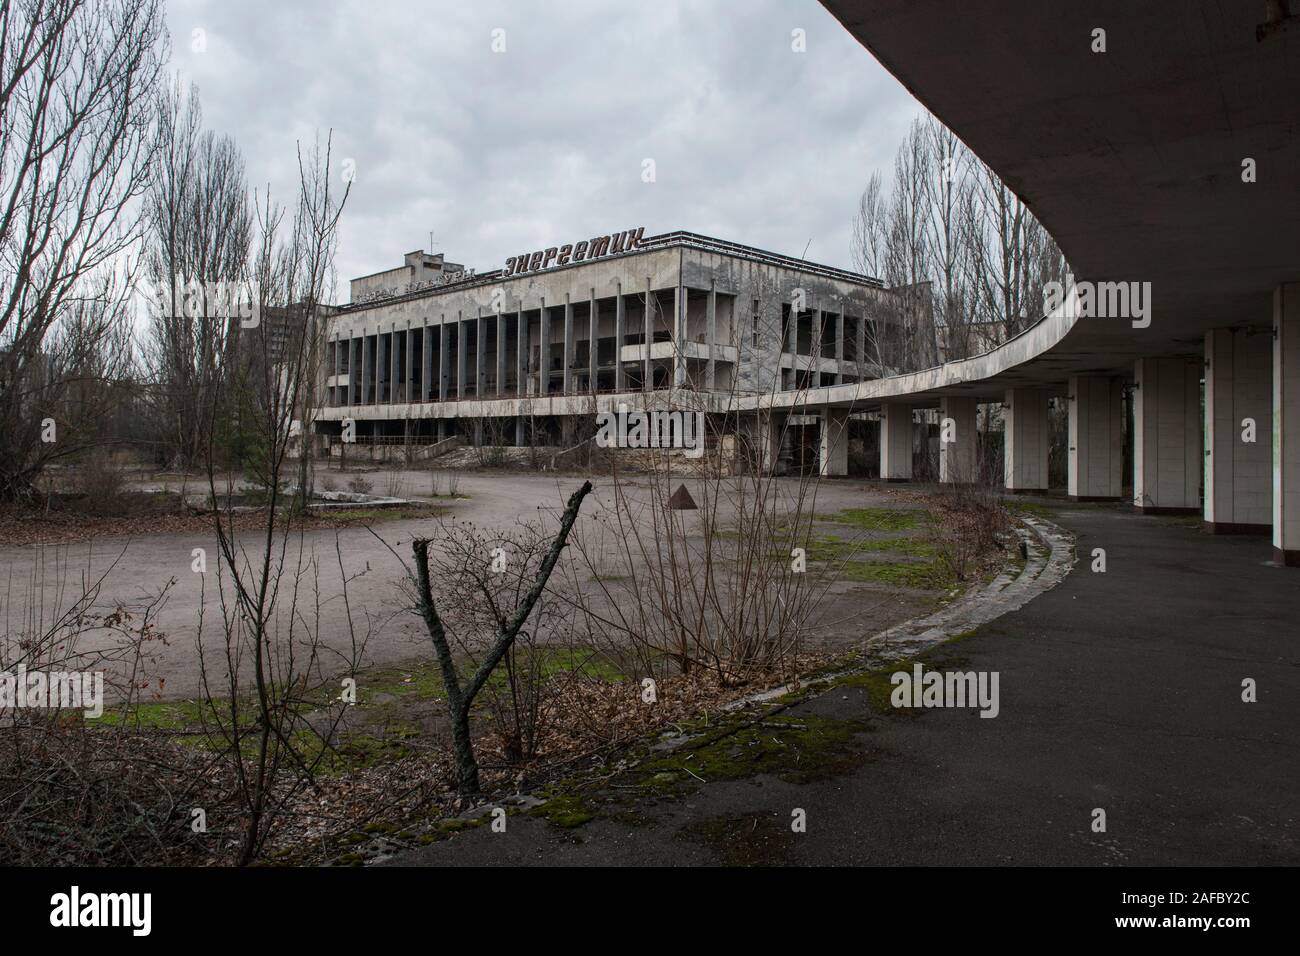 The Palace of Culture 'Energetik', located at the Lenin Square in the abandoned city Pripyat. Chernobyl Exclusion Zone, Kiev Oblast, Ukraine, Europe Stock Photo